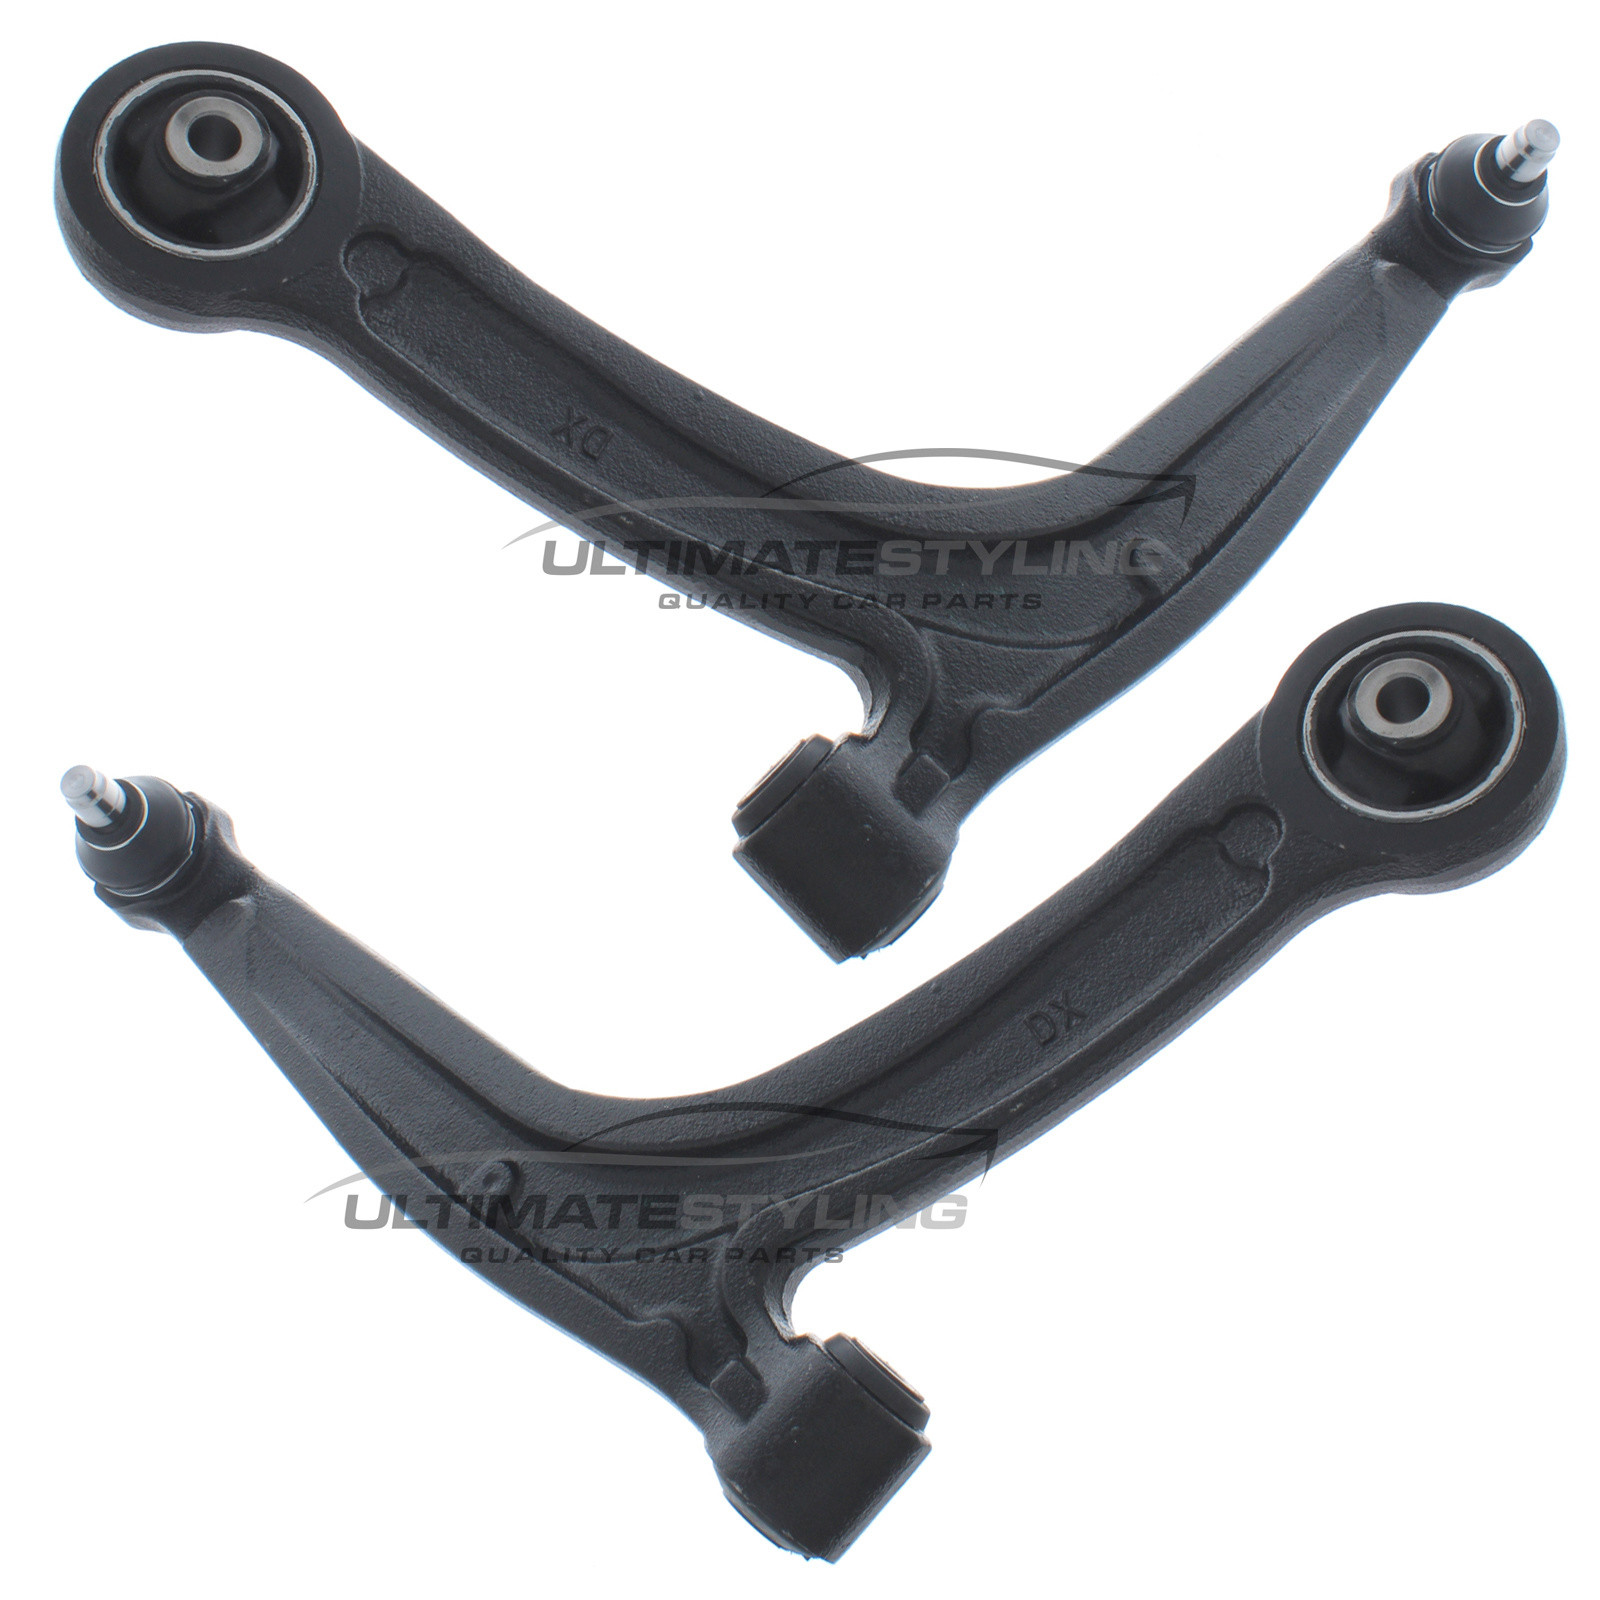 Suspension Arms for Abarth 695